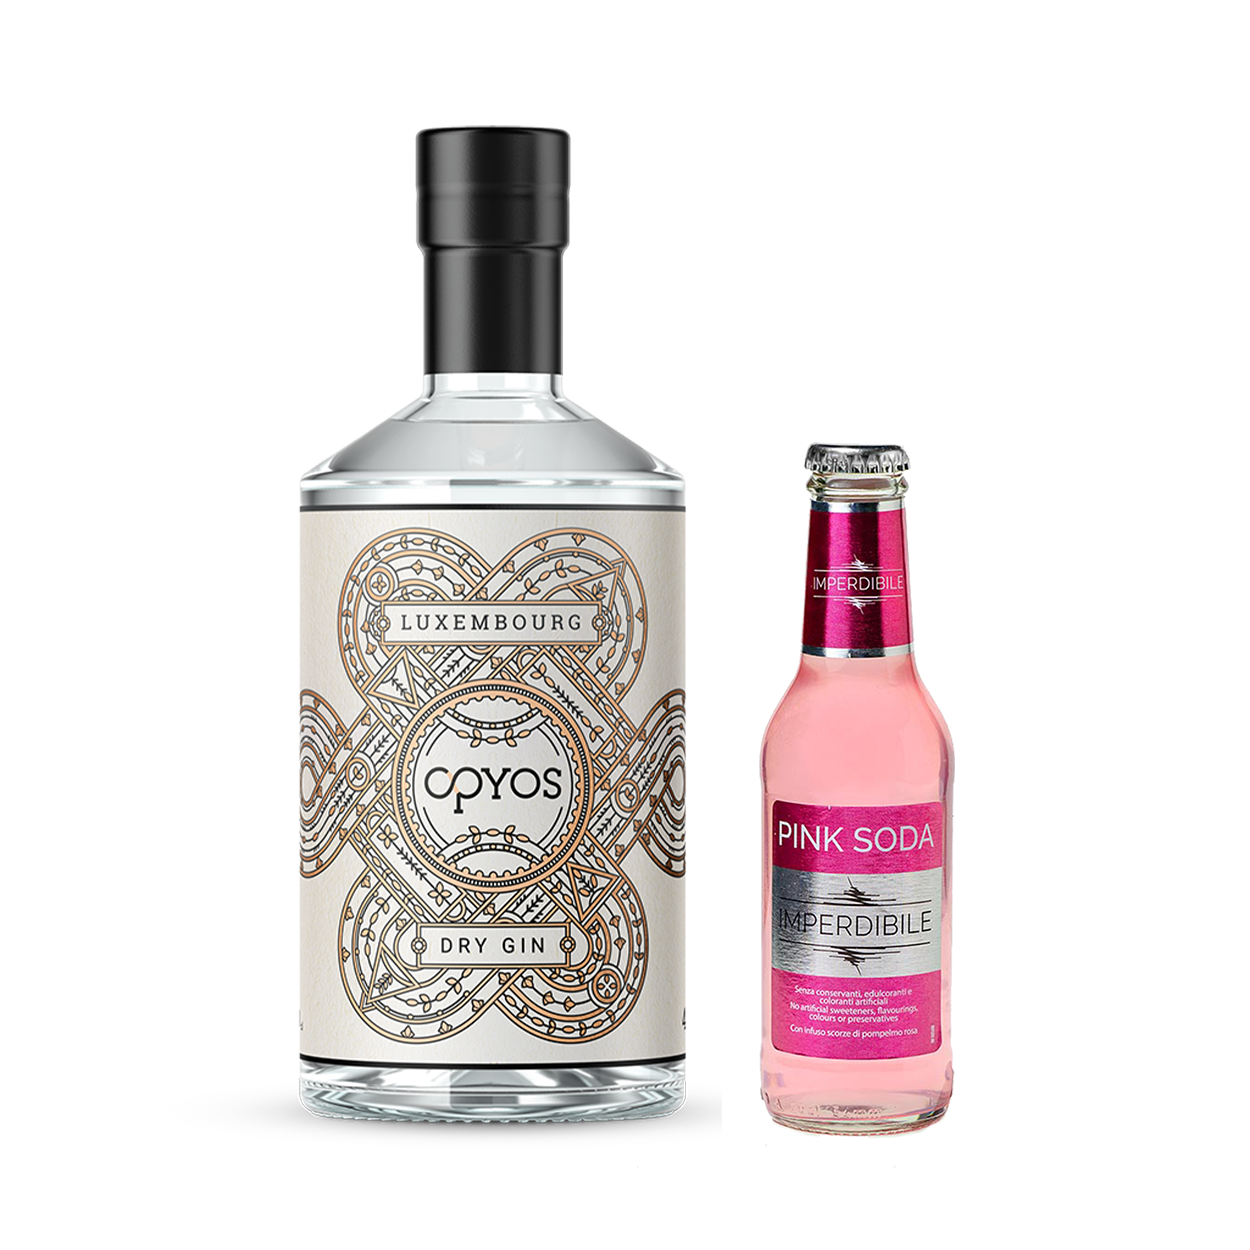 Luxembourg Dry Gin